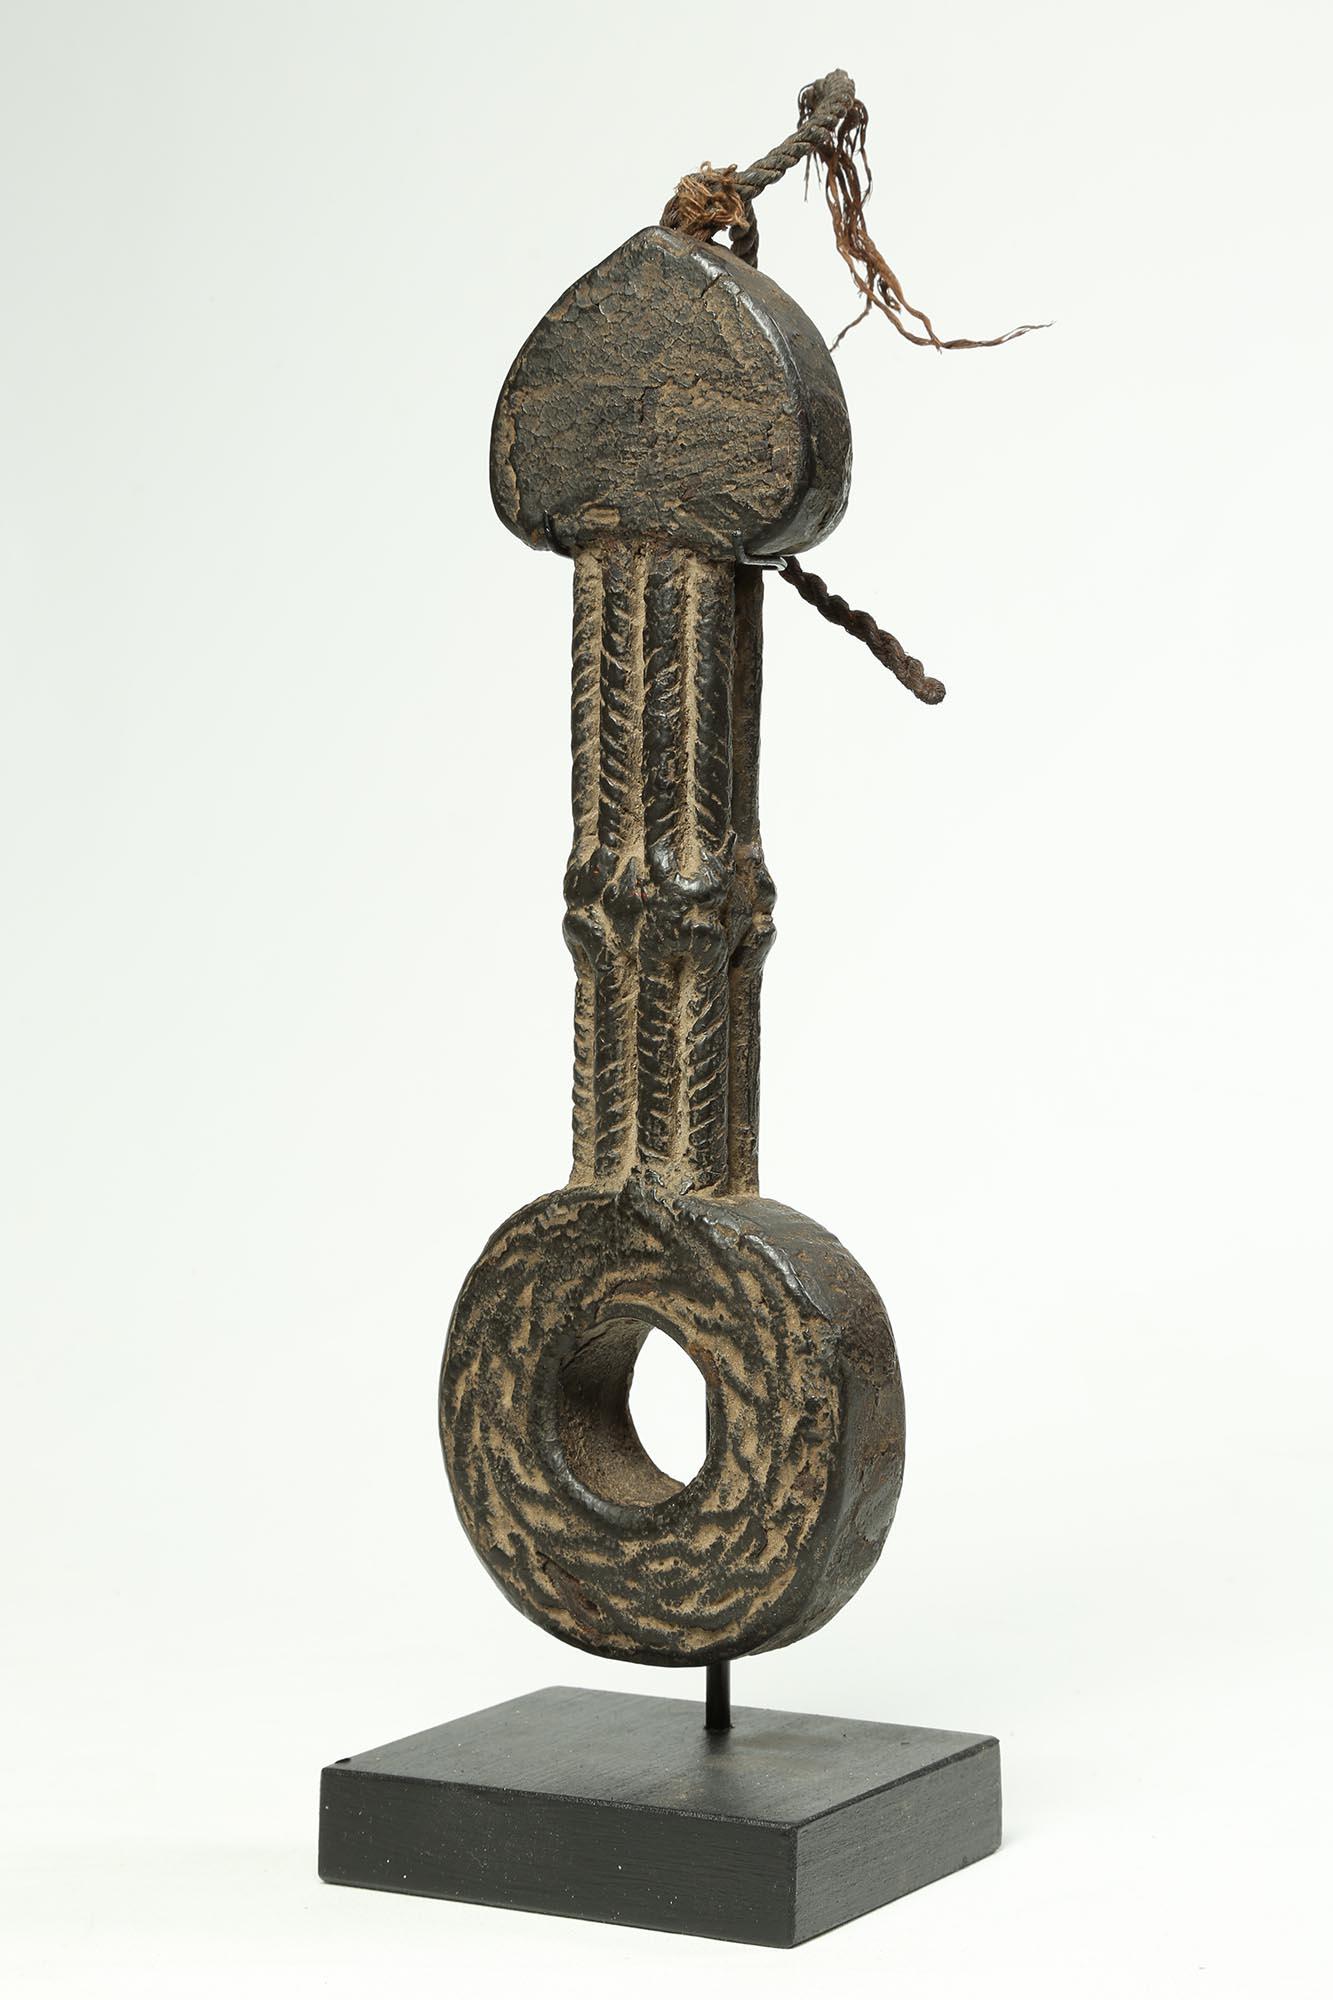 A old carved wood Nepal, North India or other Himalayan culture butter churn handle called a ghurra. Created in the early 20th century. The handle with braided columns rising to a heart-shaped top. Remains of the old cord used to connect to the